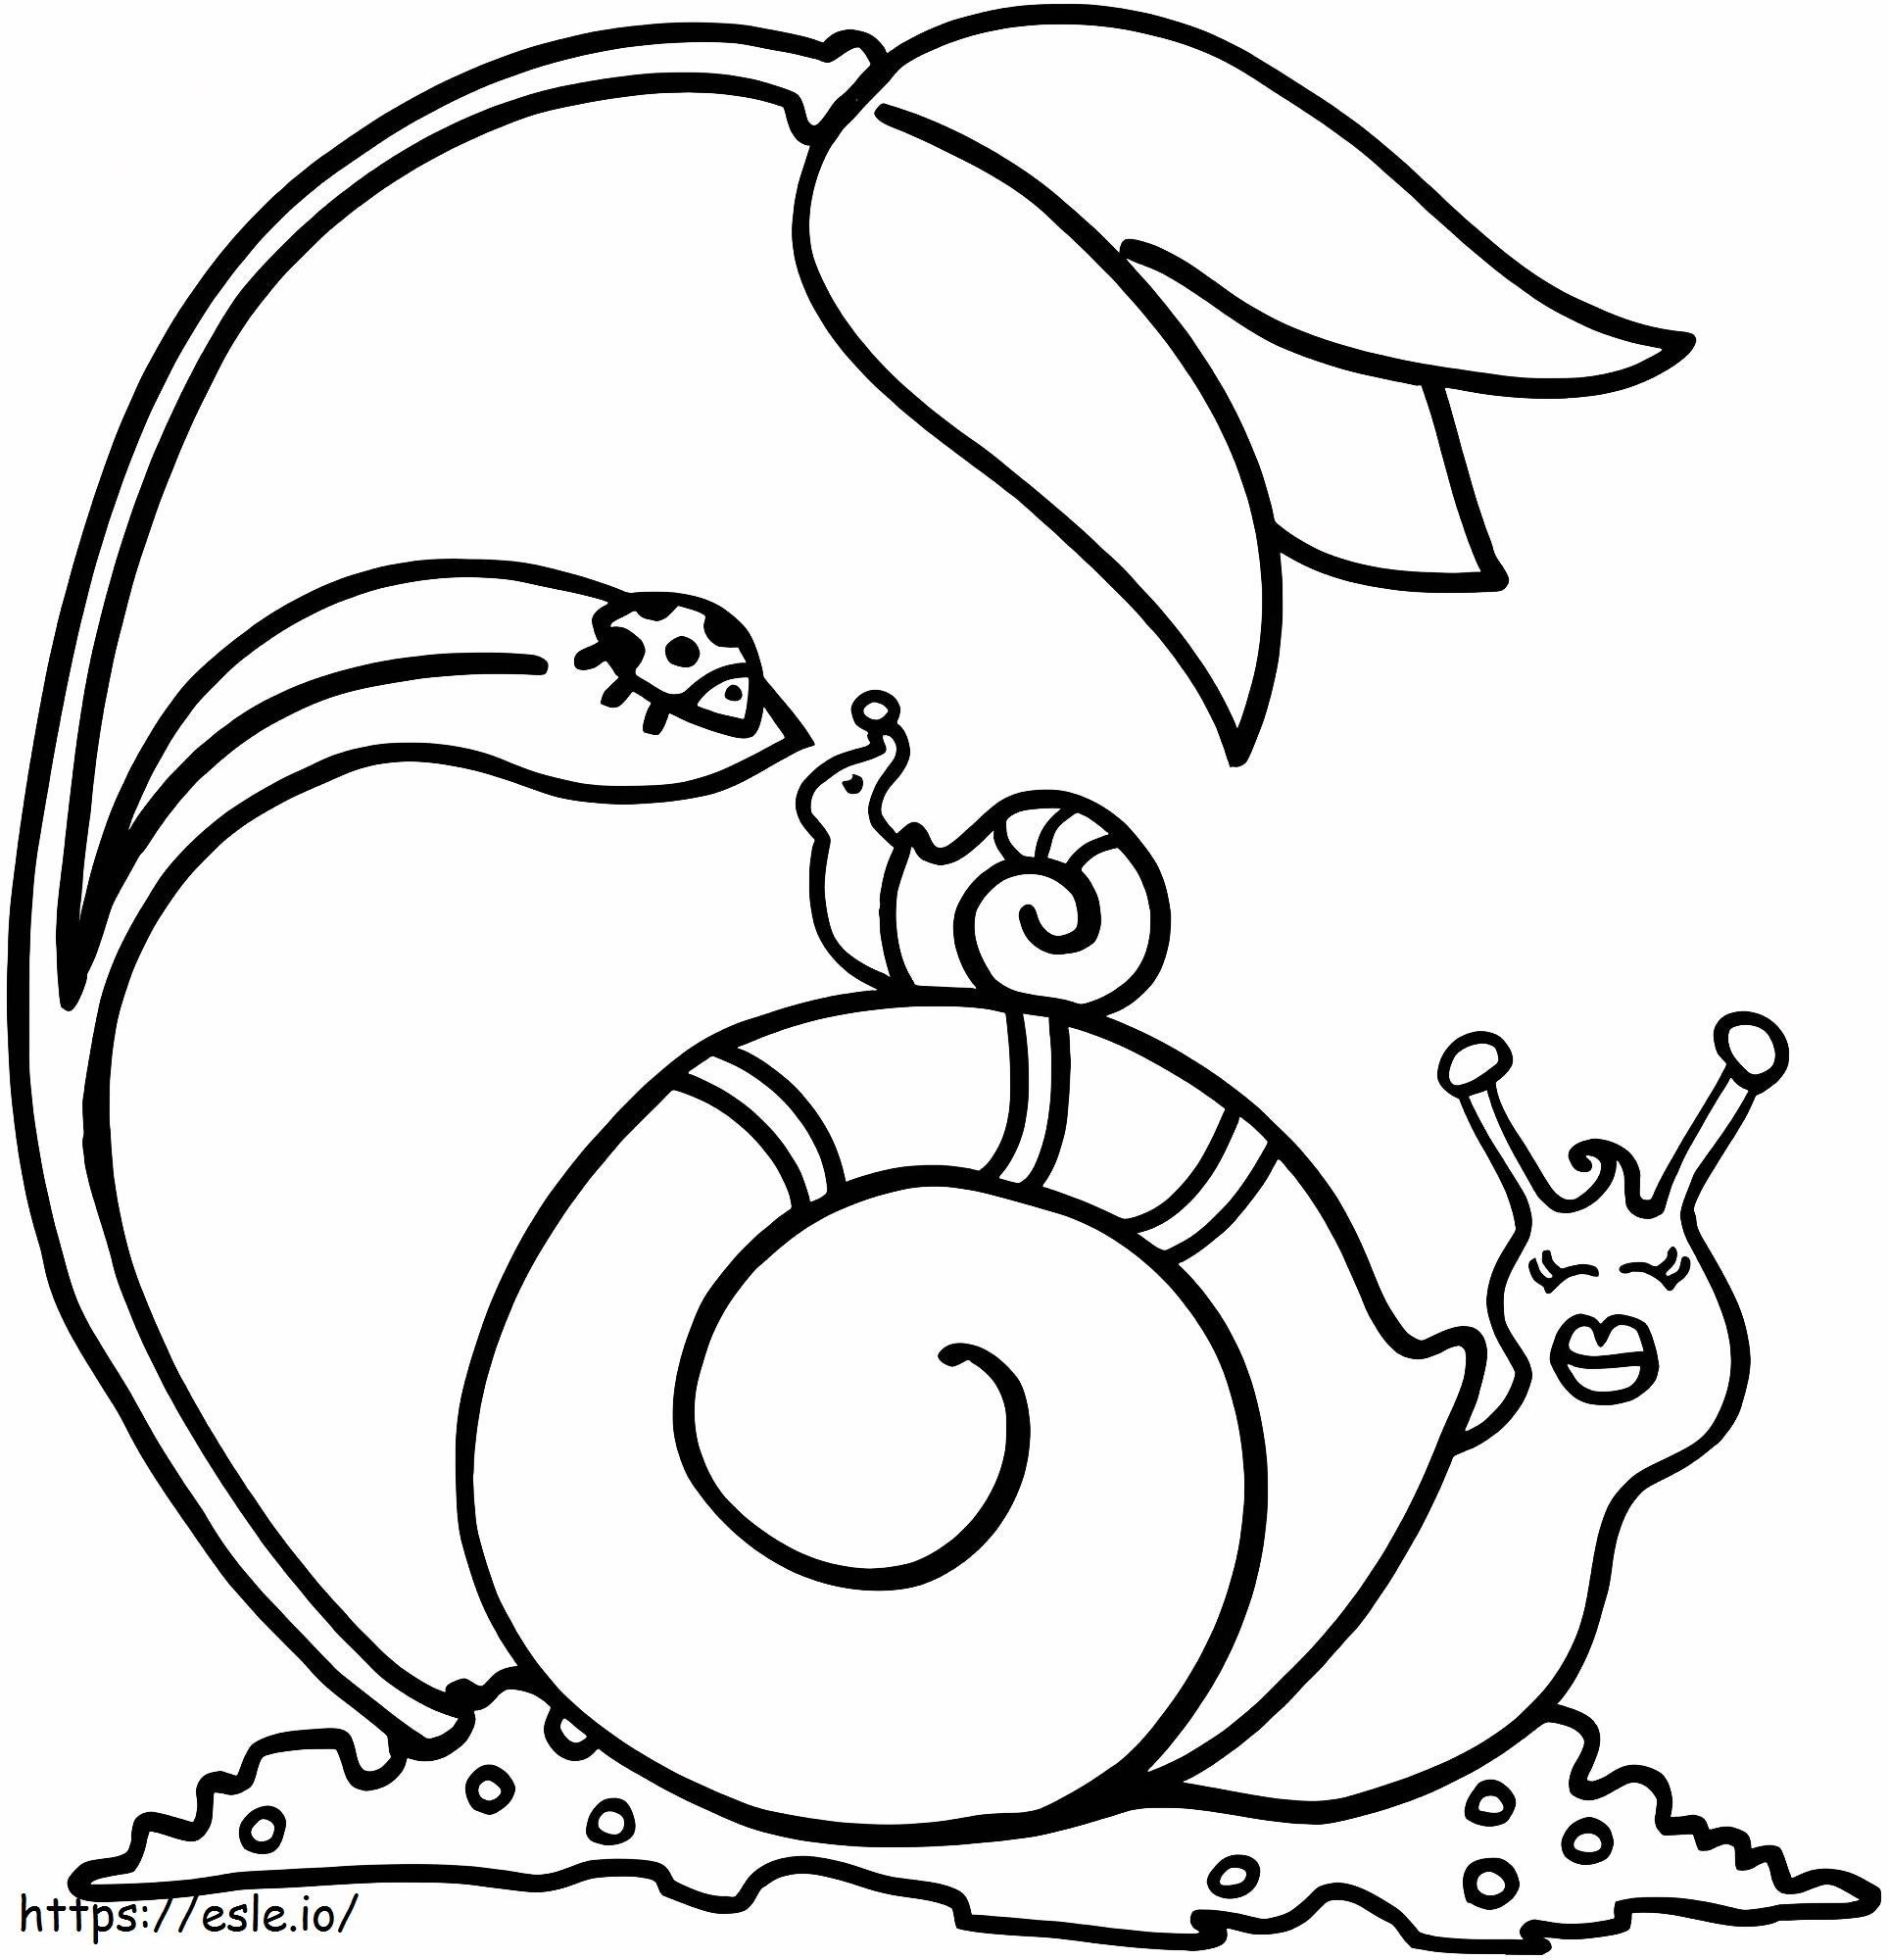 Two Snail Coloring Page coloring page